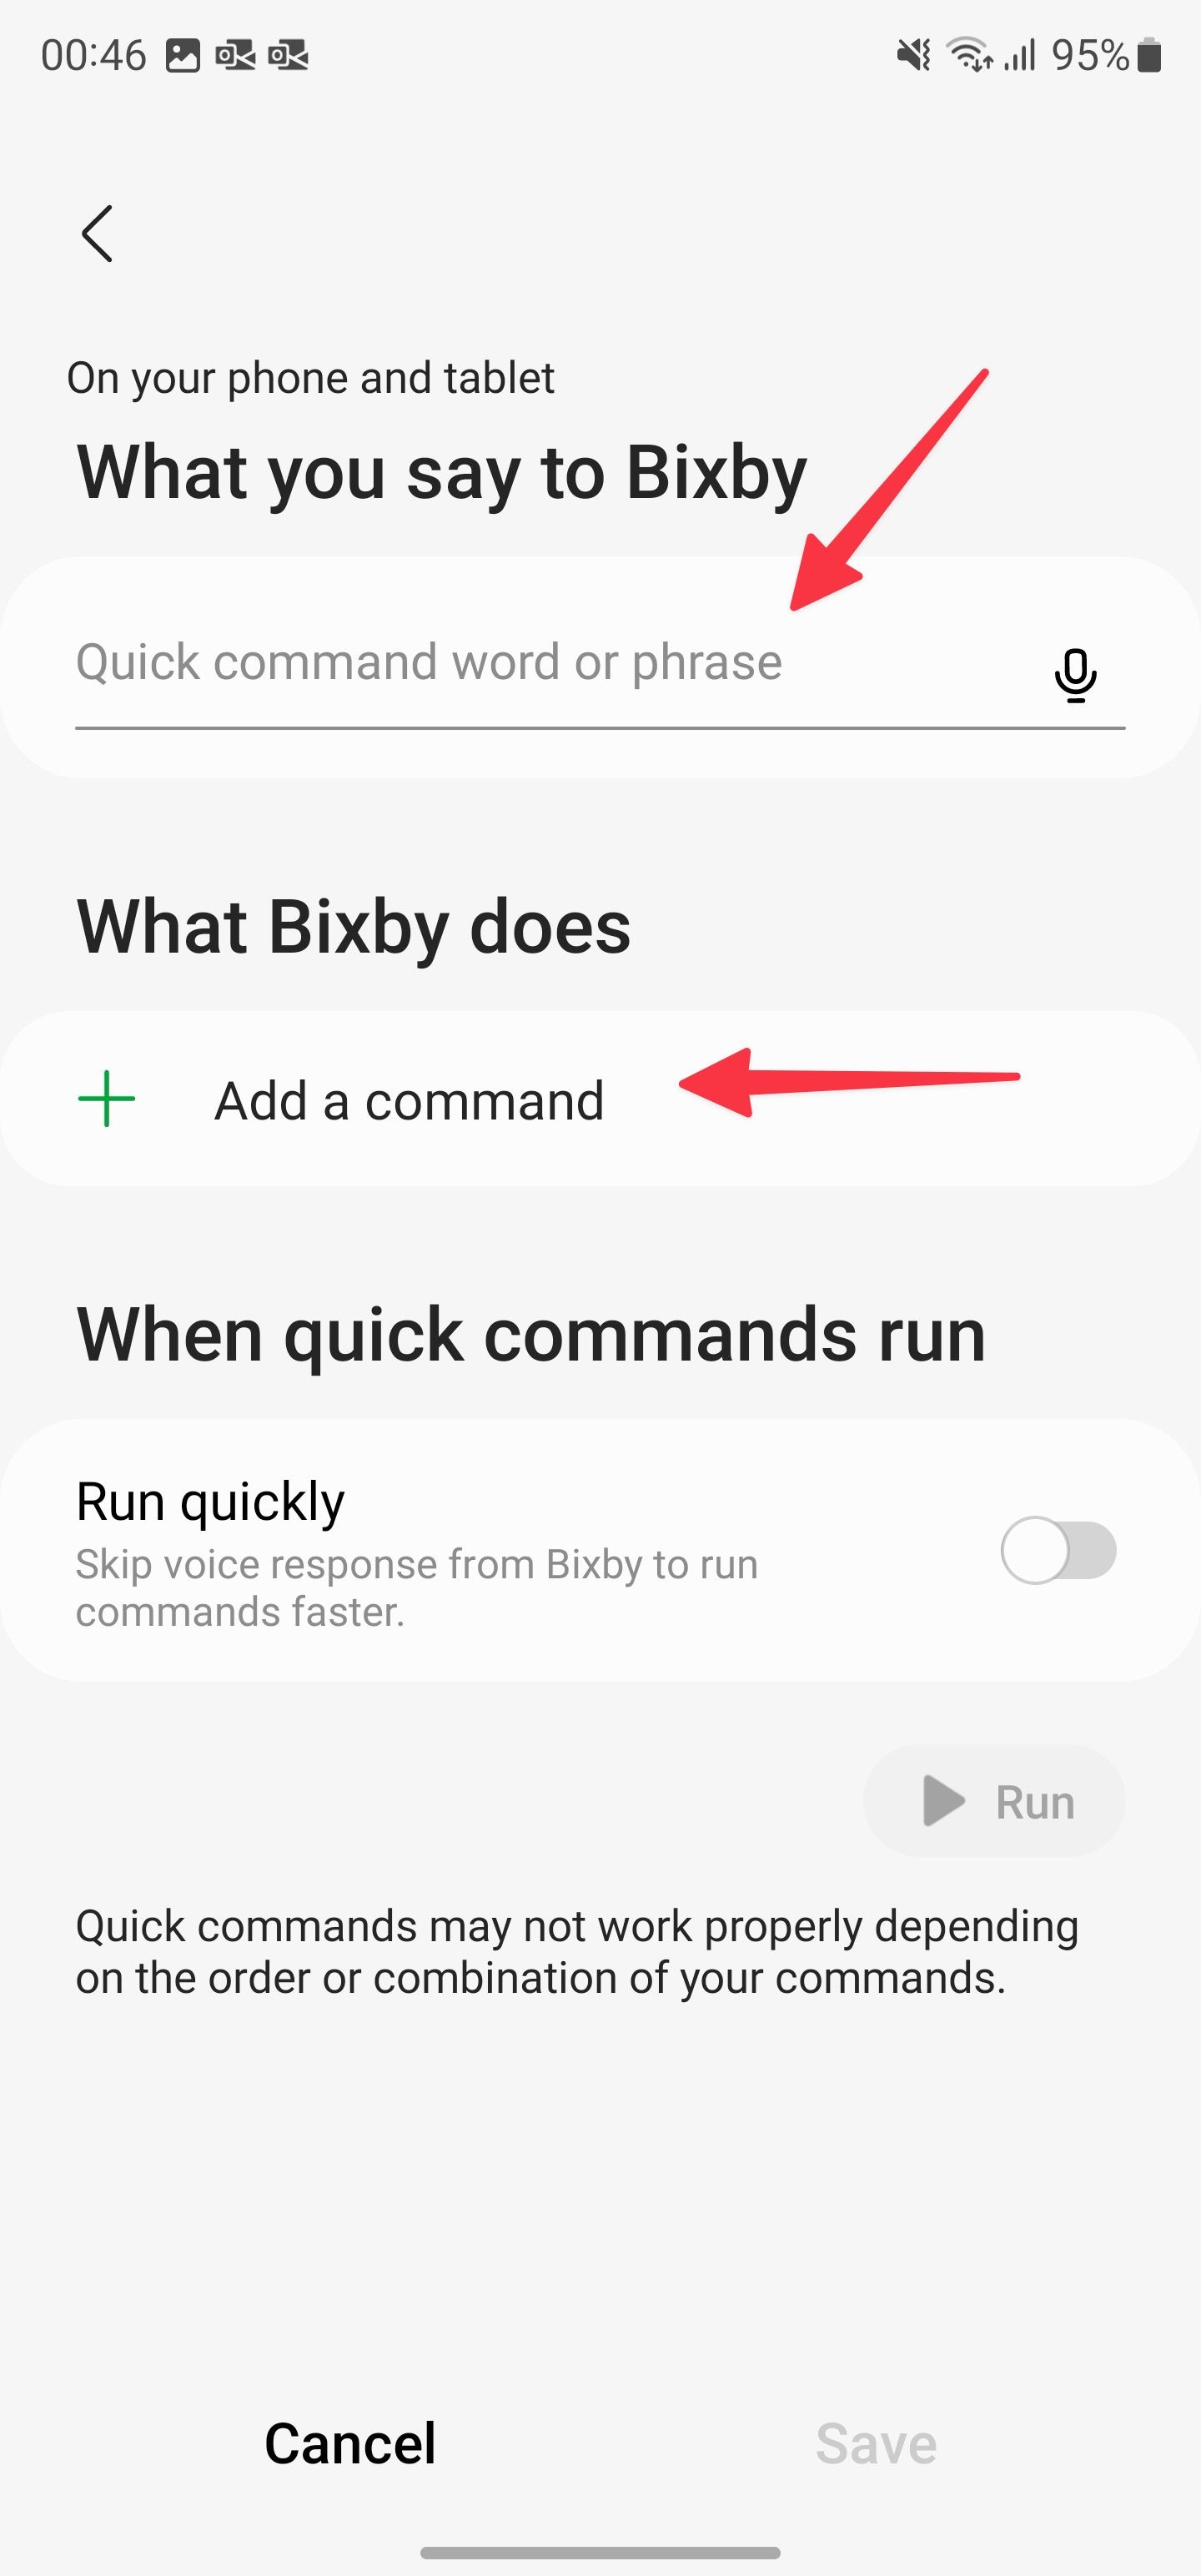 enter Bixby command and phrase